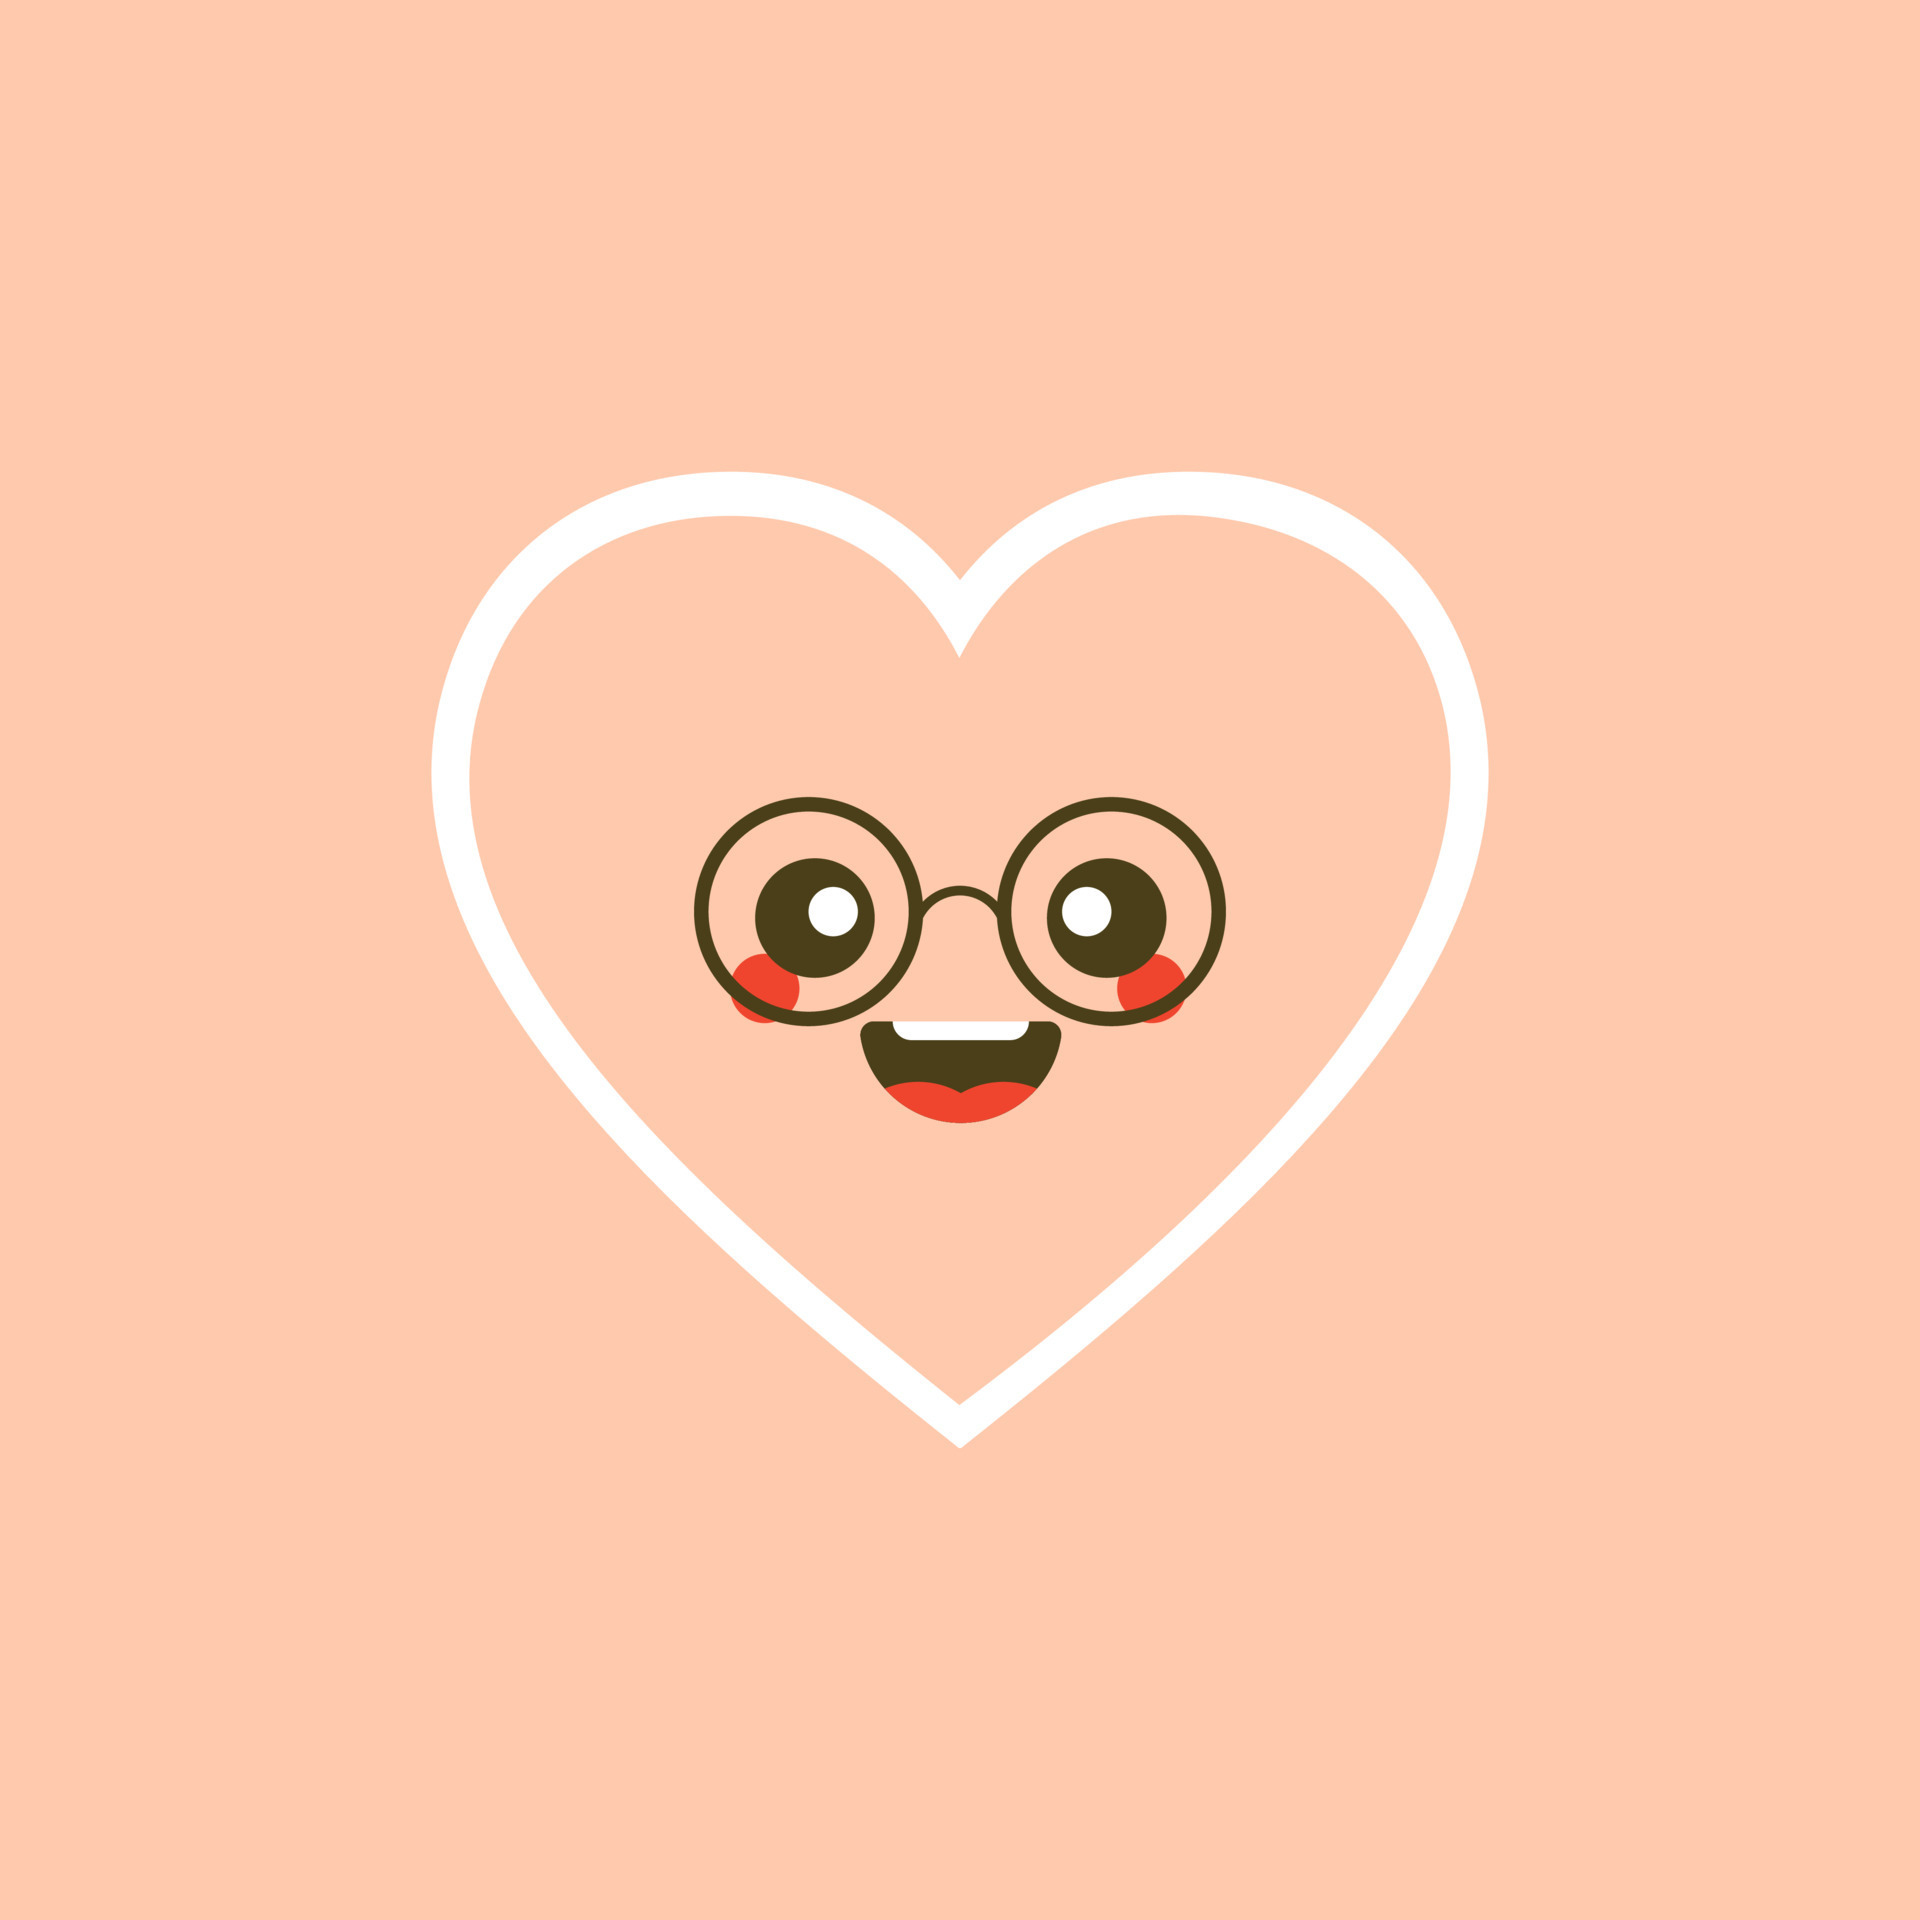 Cute set of holiday Valentines day funny cartoon character of emoji hearts.  Vector illustration of cute and kawaii heart. Art design for Valentine's Day  greetings and card, web, banner, love symbol 7552284